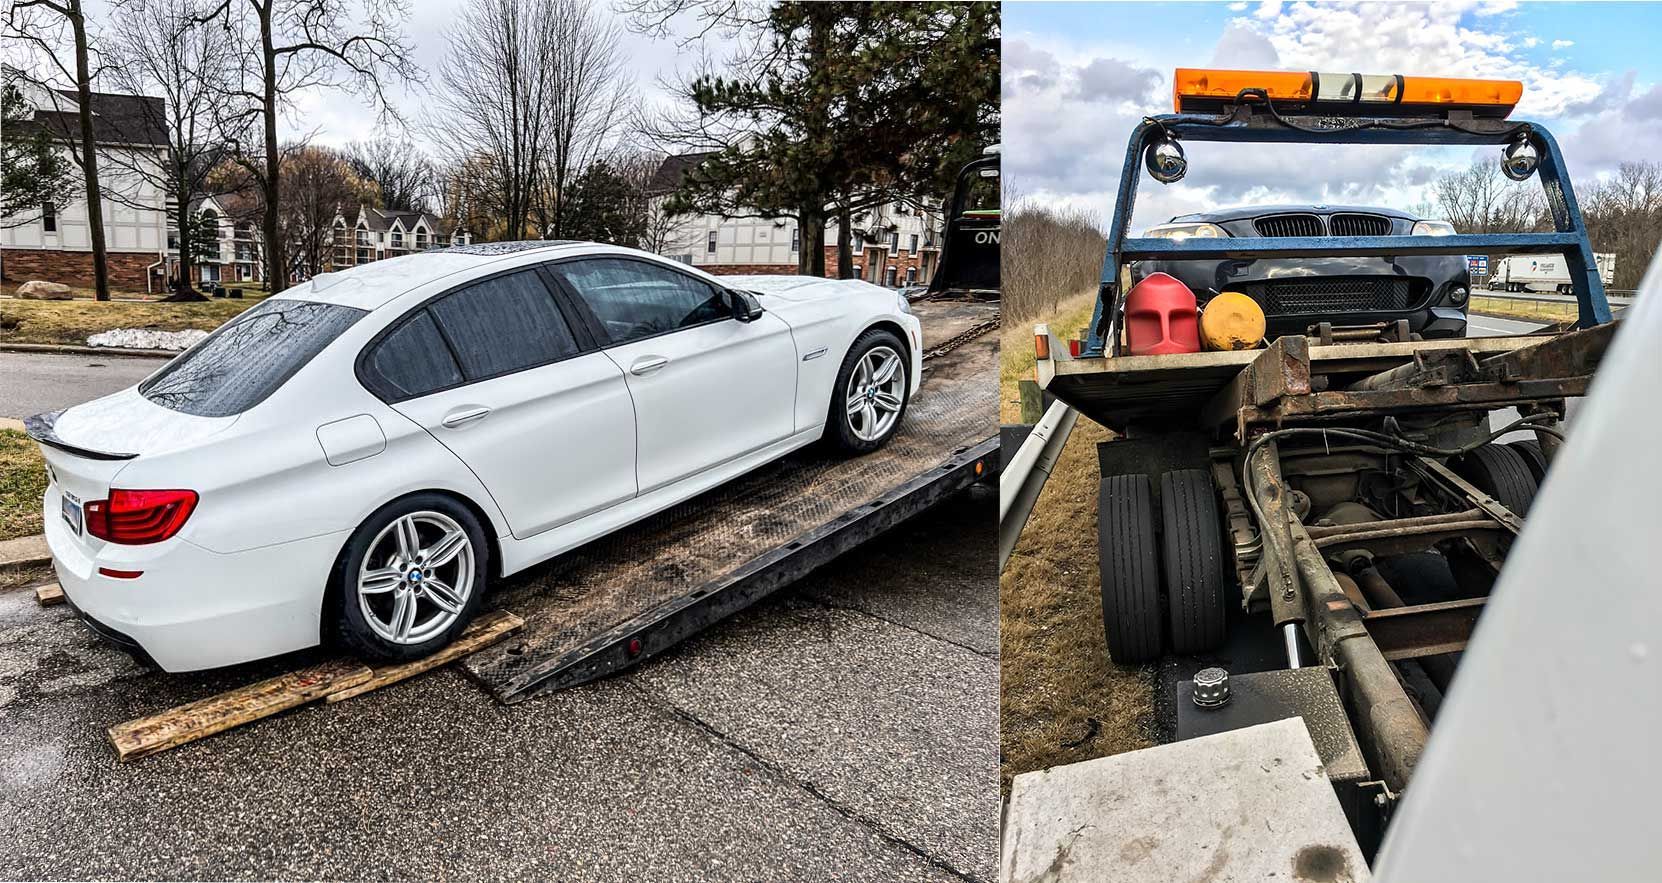 BMW Overheating issues: two different 5 series BMW vehicles of mine getting towed